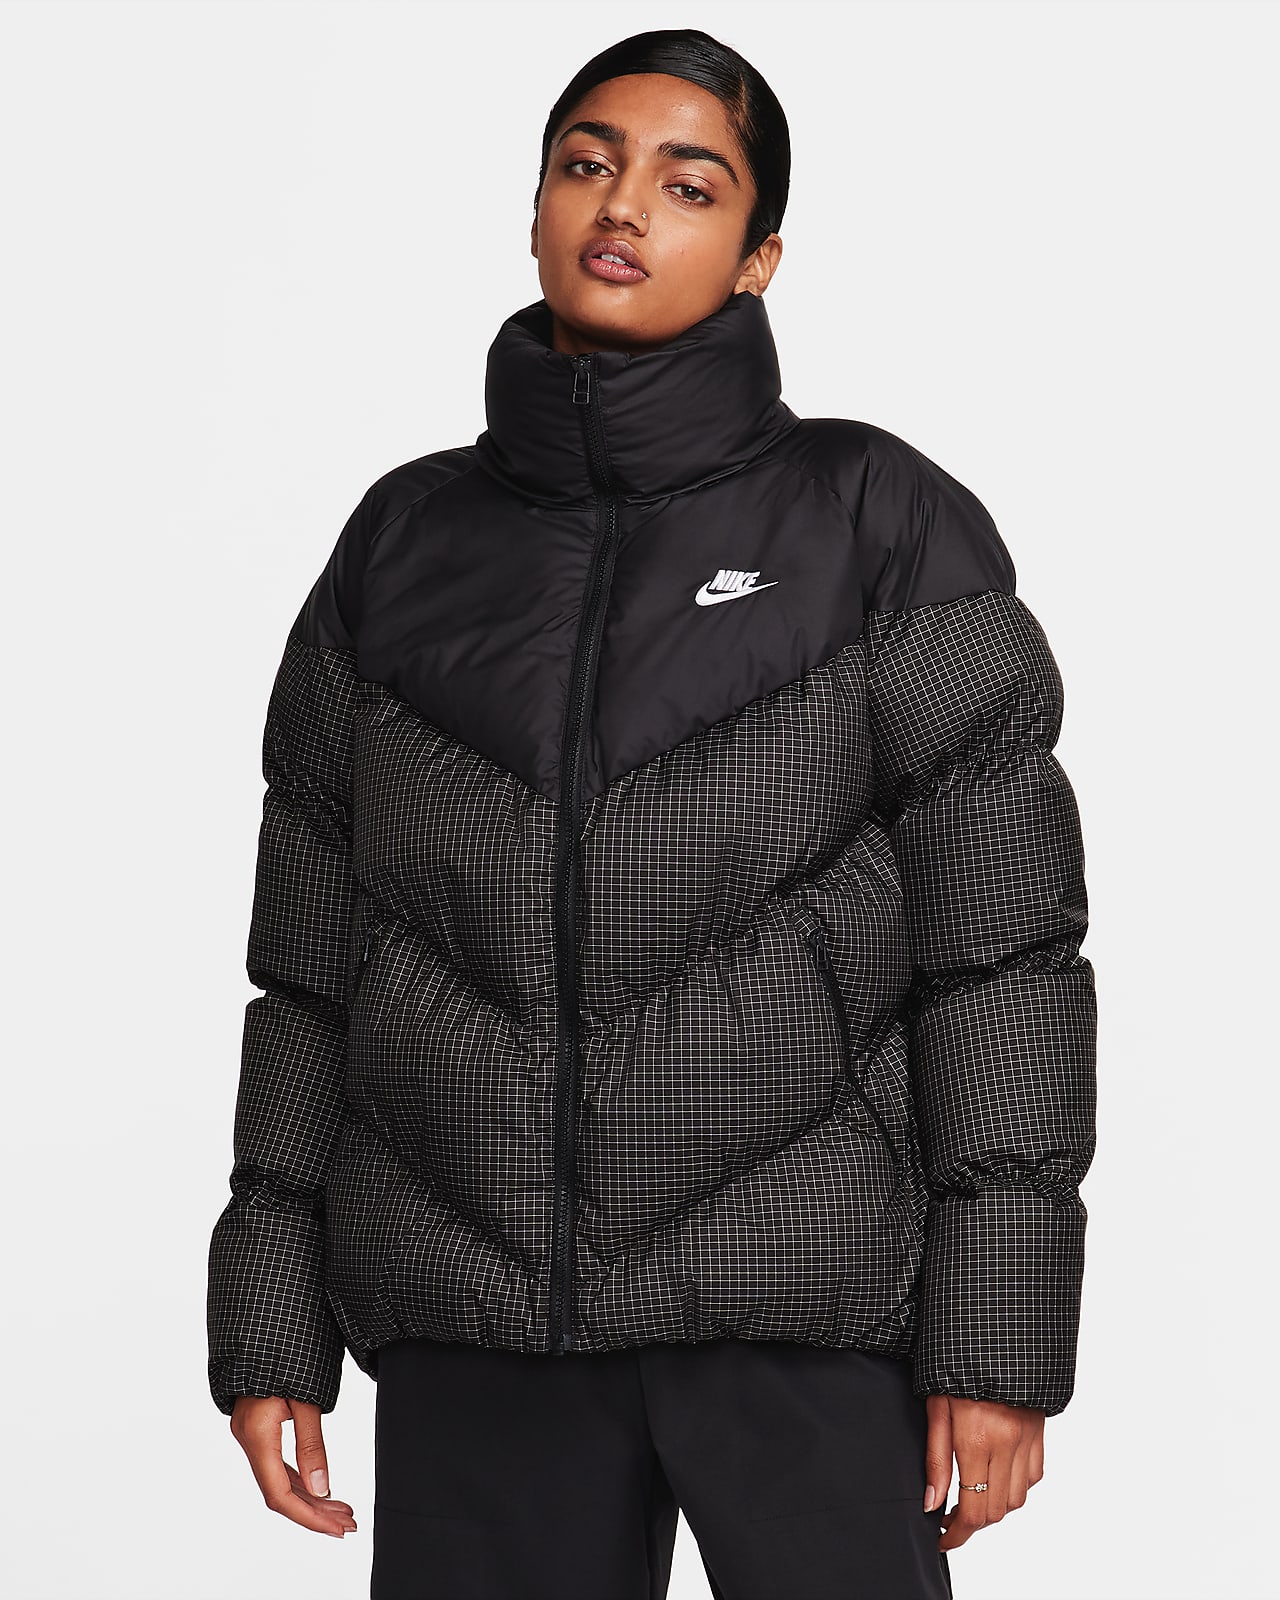 Puffer jackets: We may have hit peak puffer